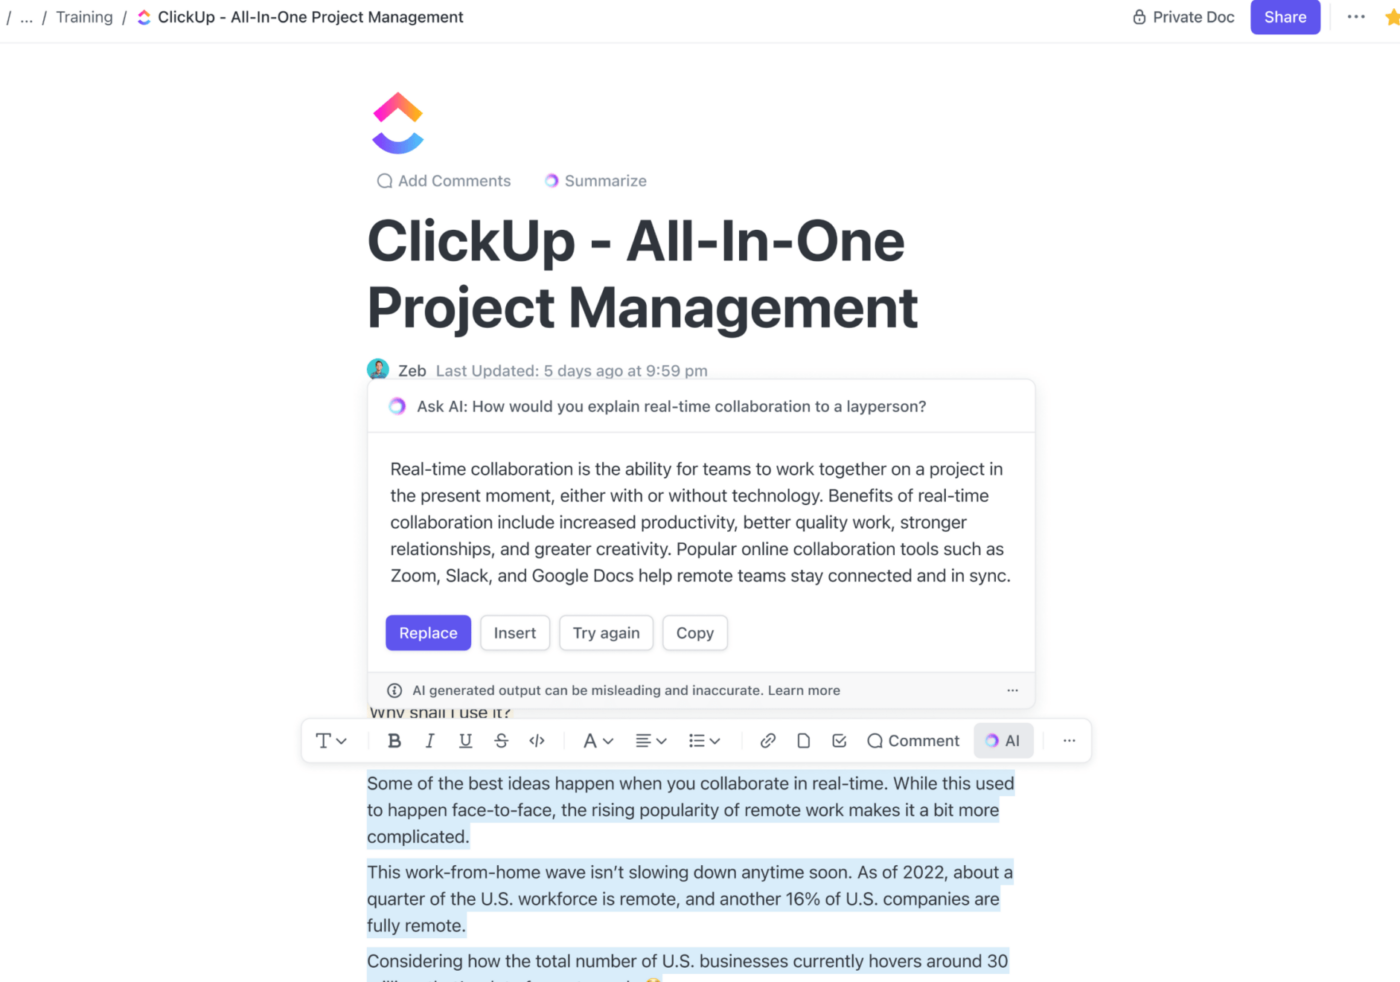 Writing copy with ClickUp AI